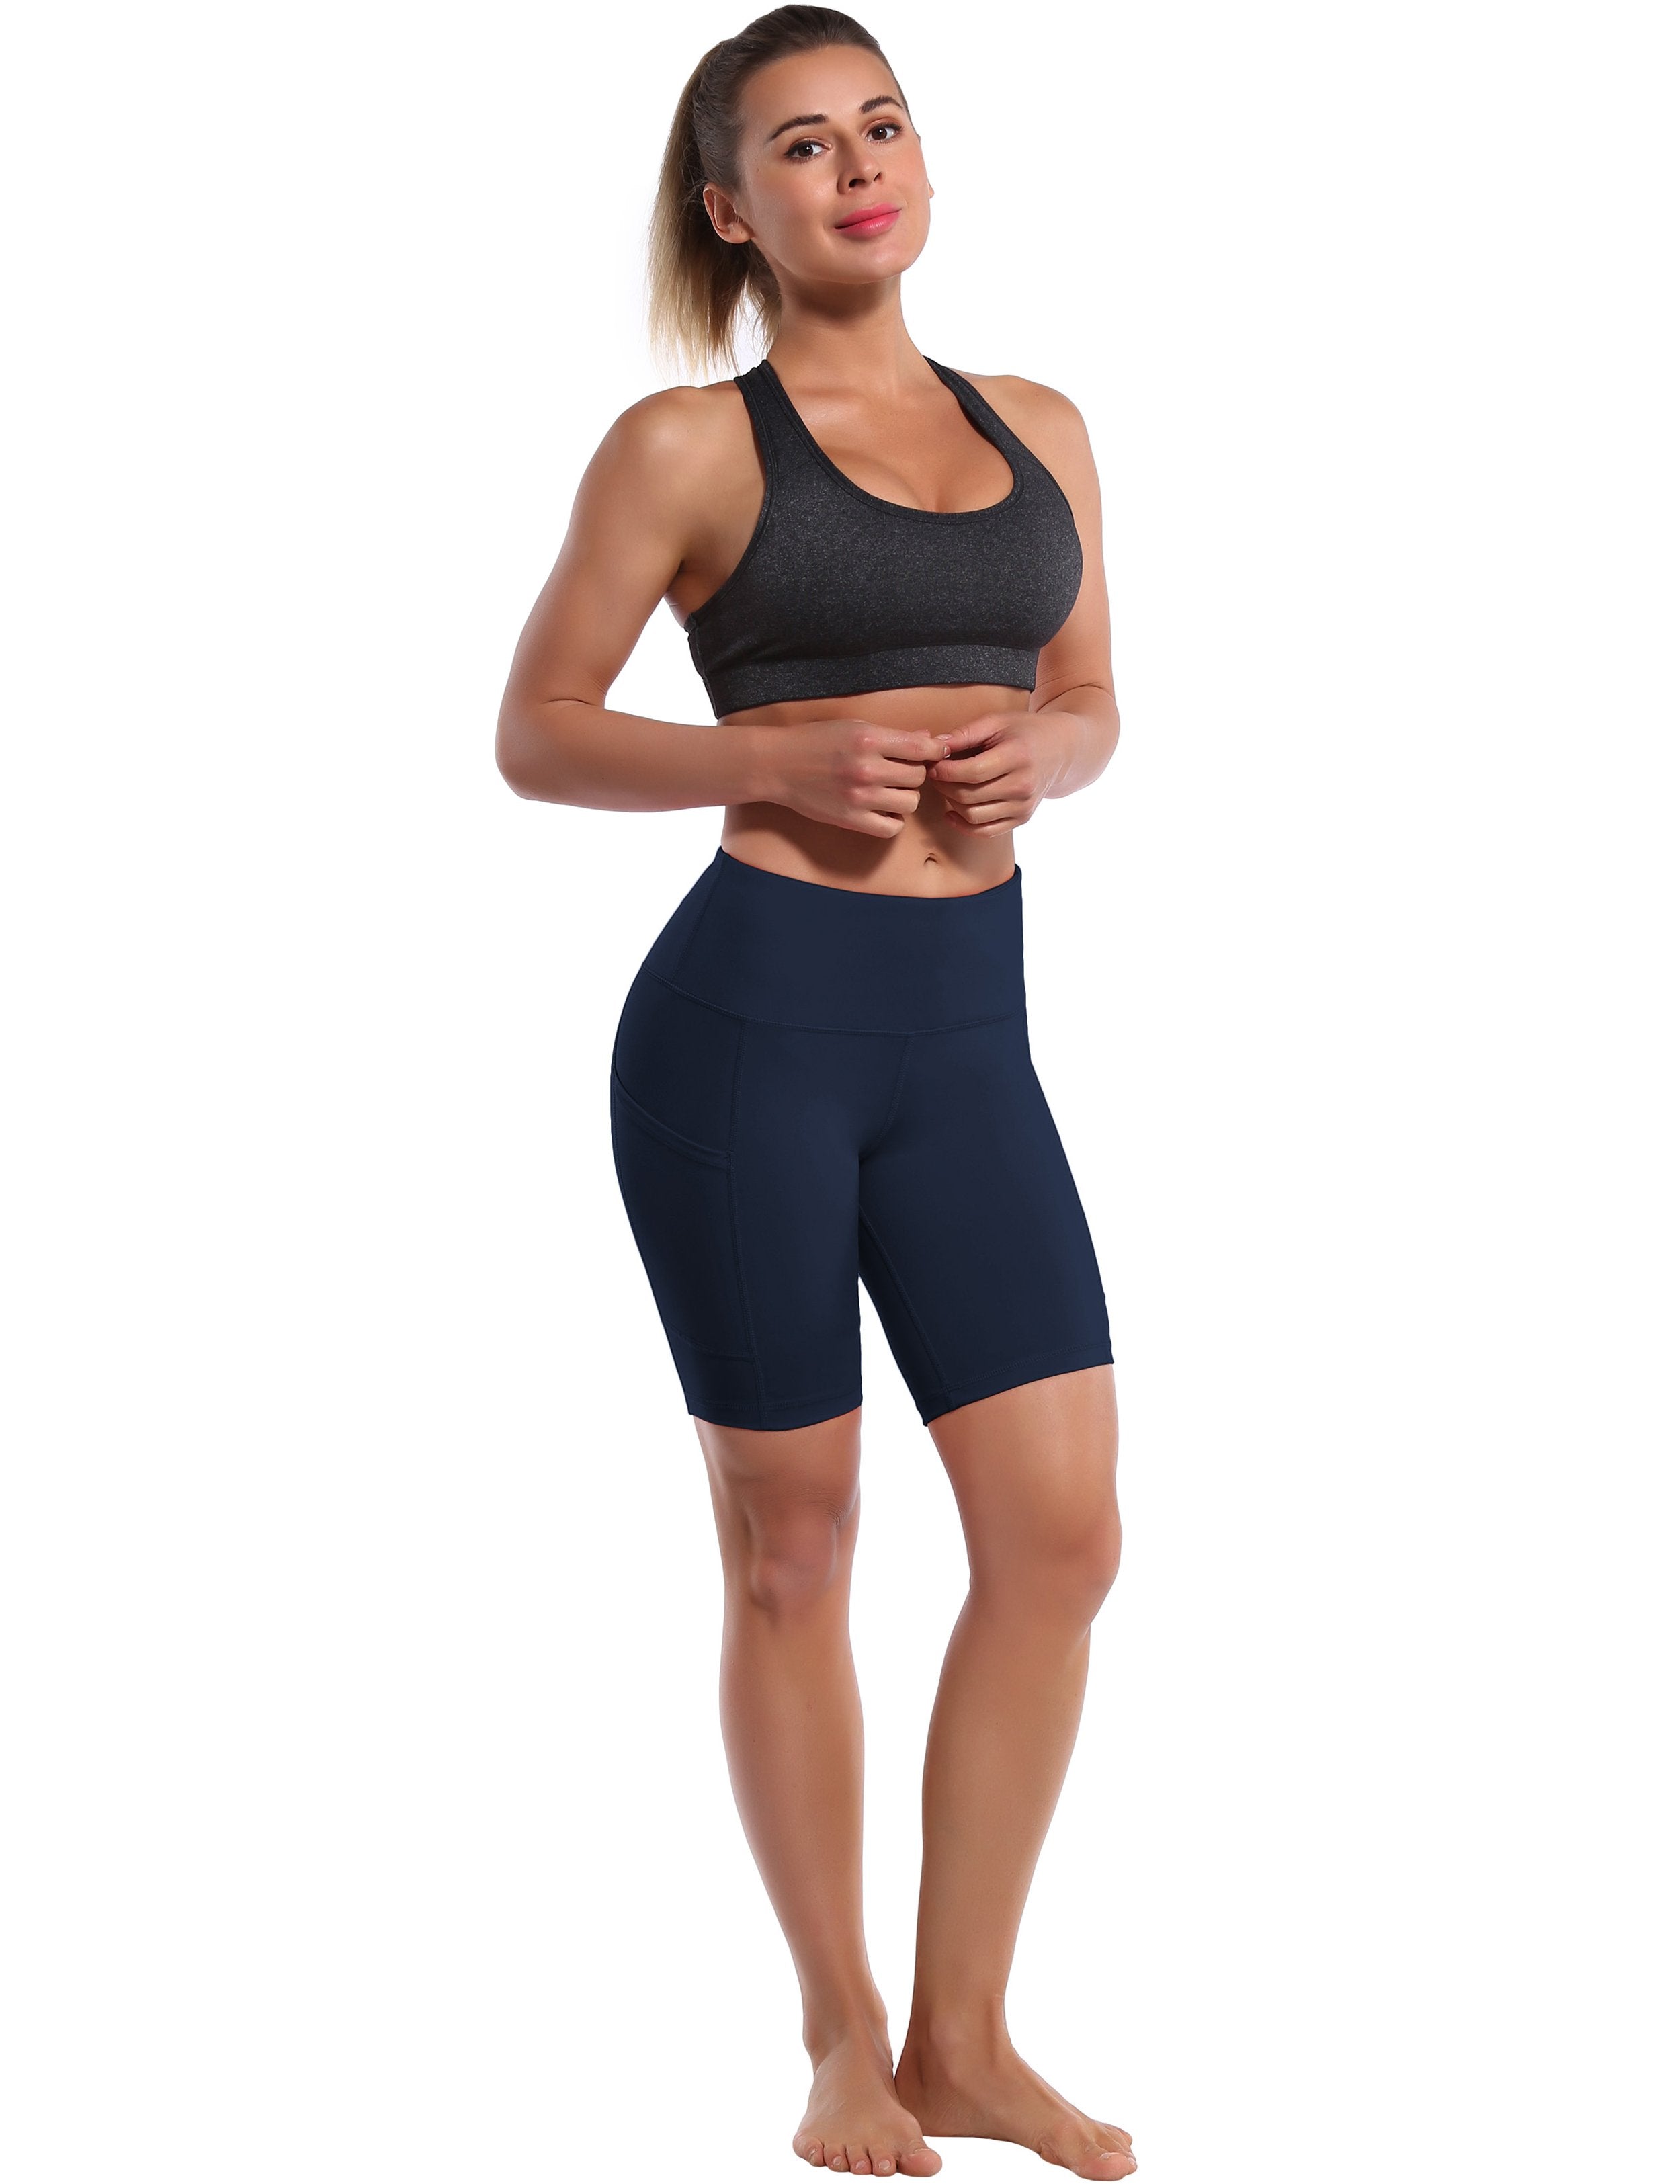 8" Side Pockets yogastudio Shorts darknavy Sleek, soft, smooth and totally comfortable: our newest style is here. Softest-ever fabric High elasticity High density 4-way stretch Fabric doesn't attract lint easily No see-through Moisture-wicking Machine wash 75% Nylon, 25% Spandex